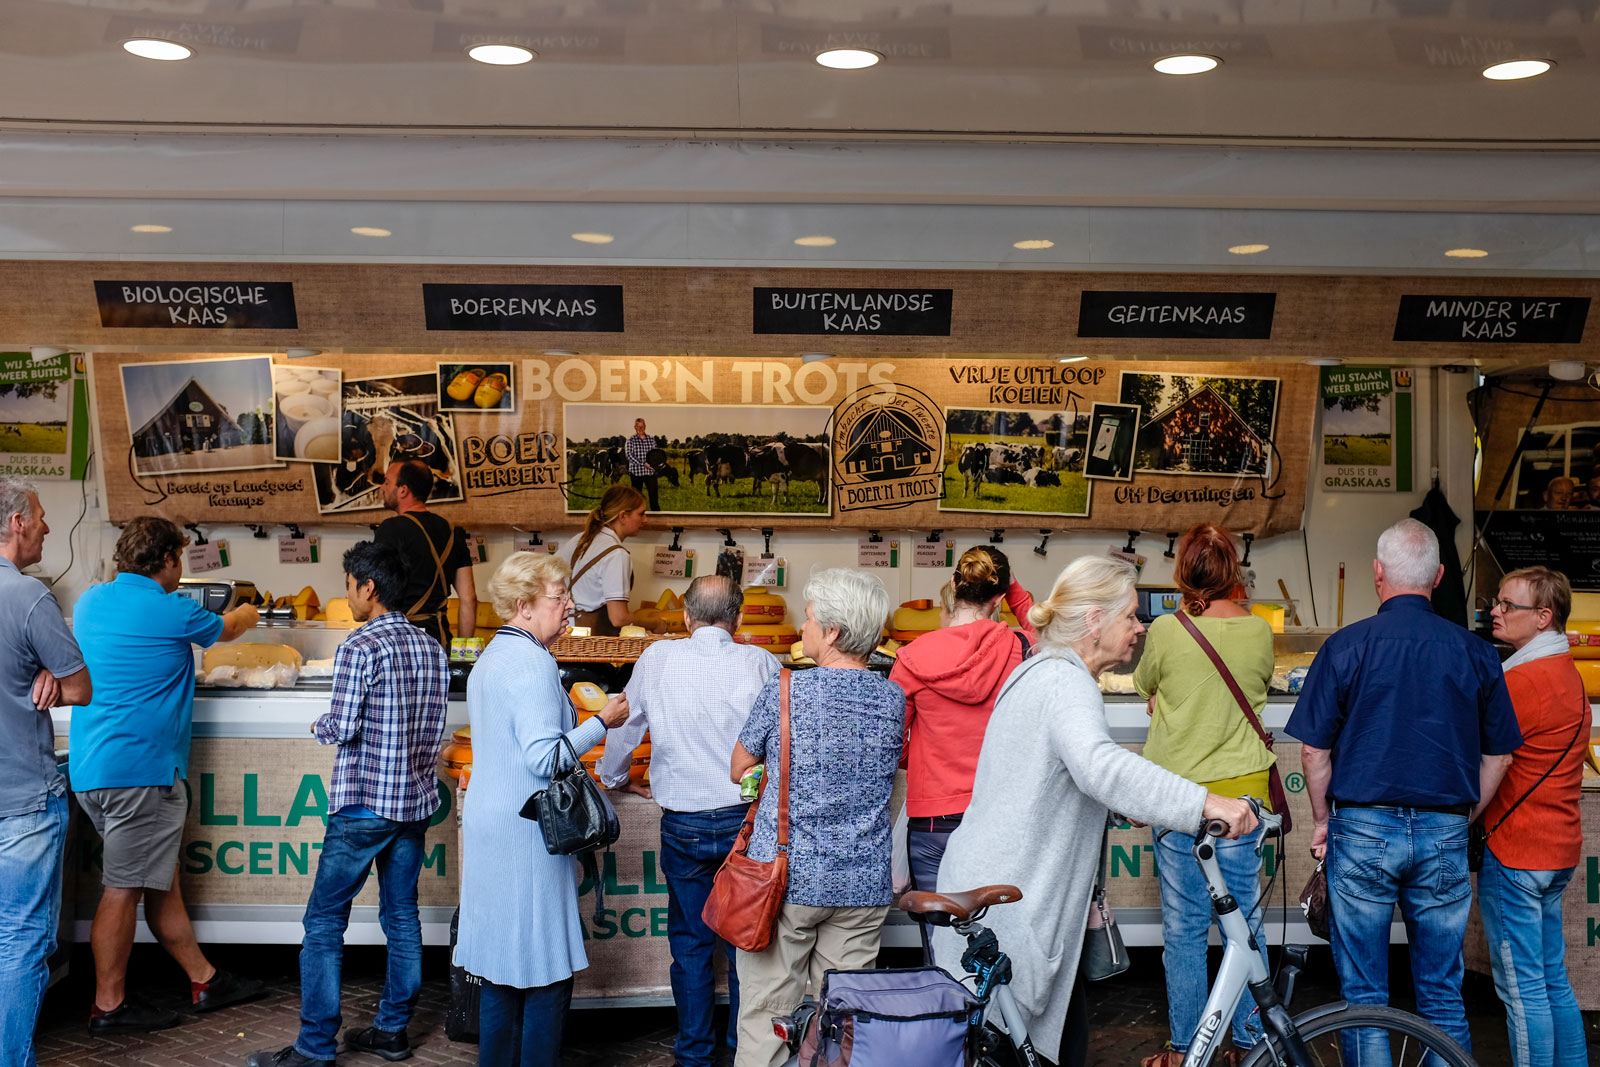 A crowd orders cheese at a Delft Market stand